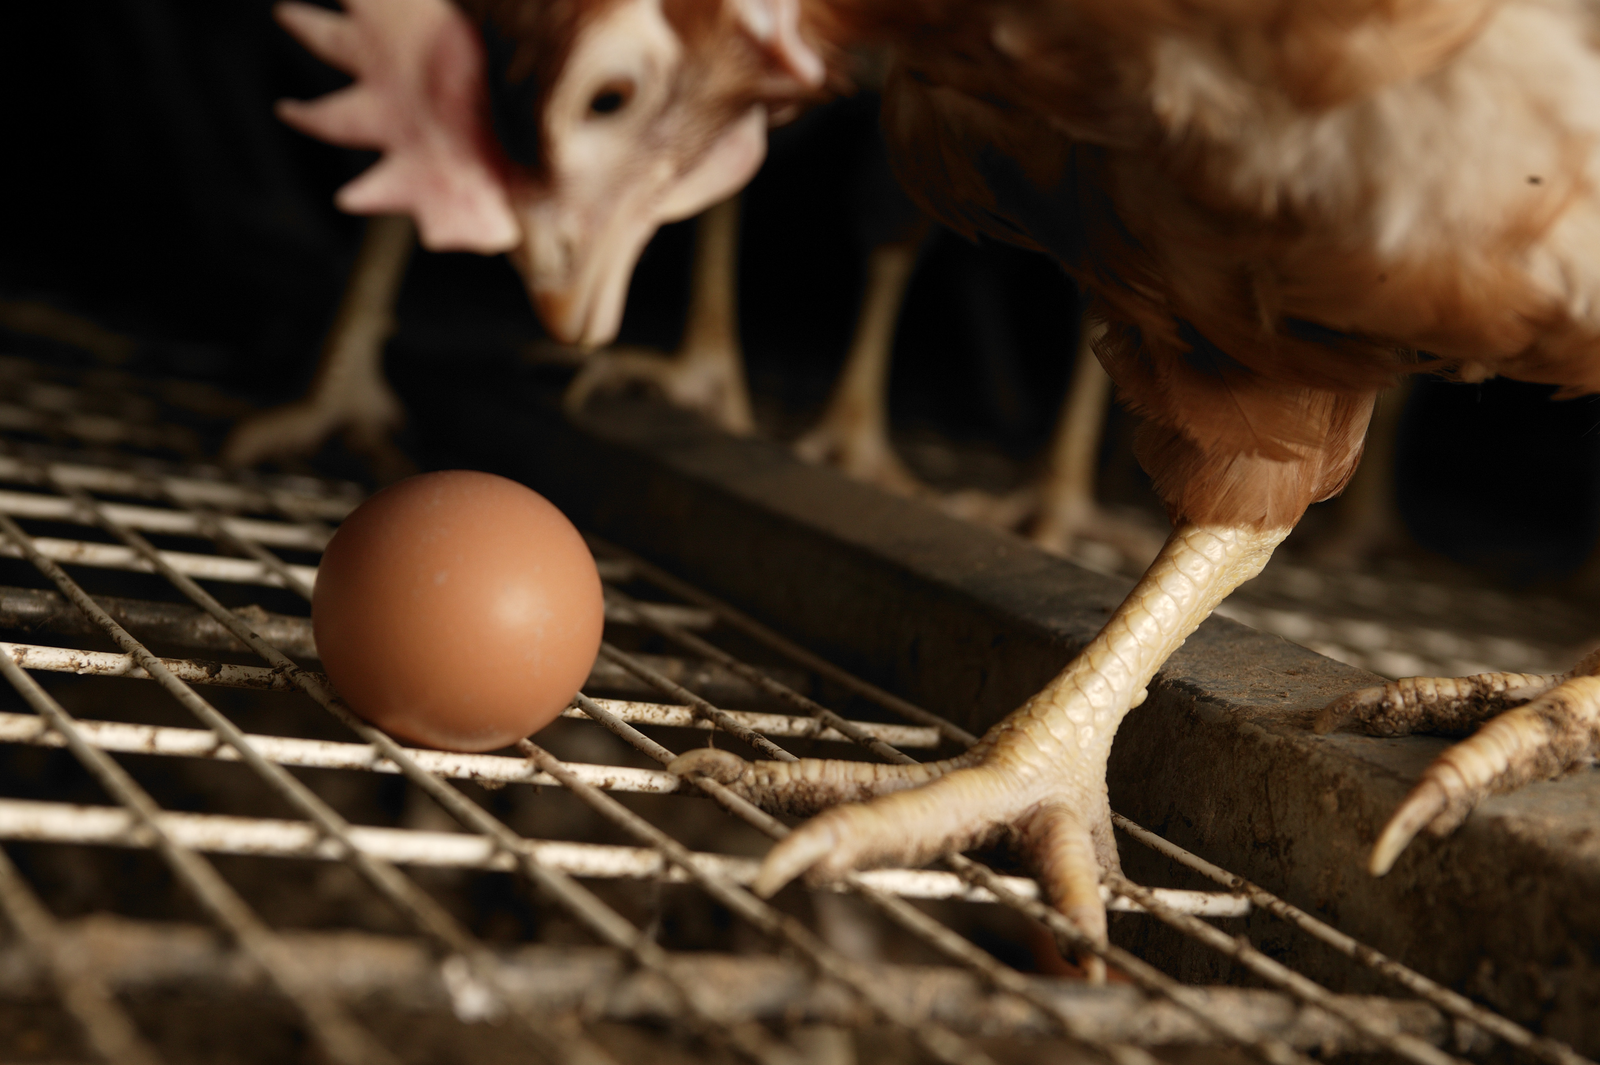 Misleading promotion of soy-free fed hens